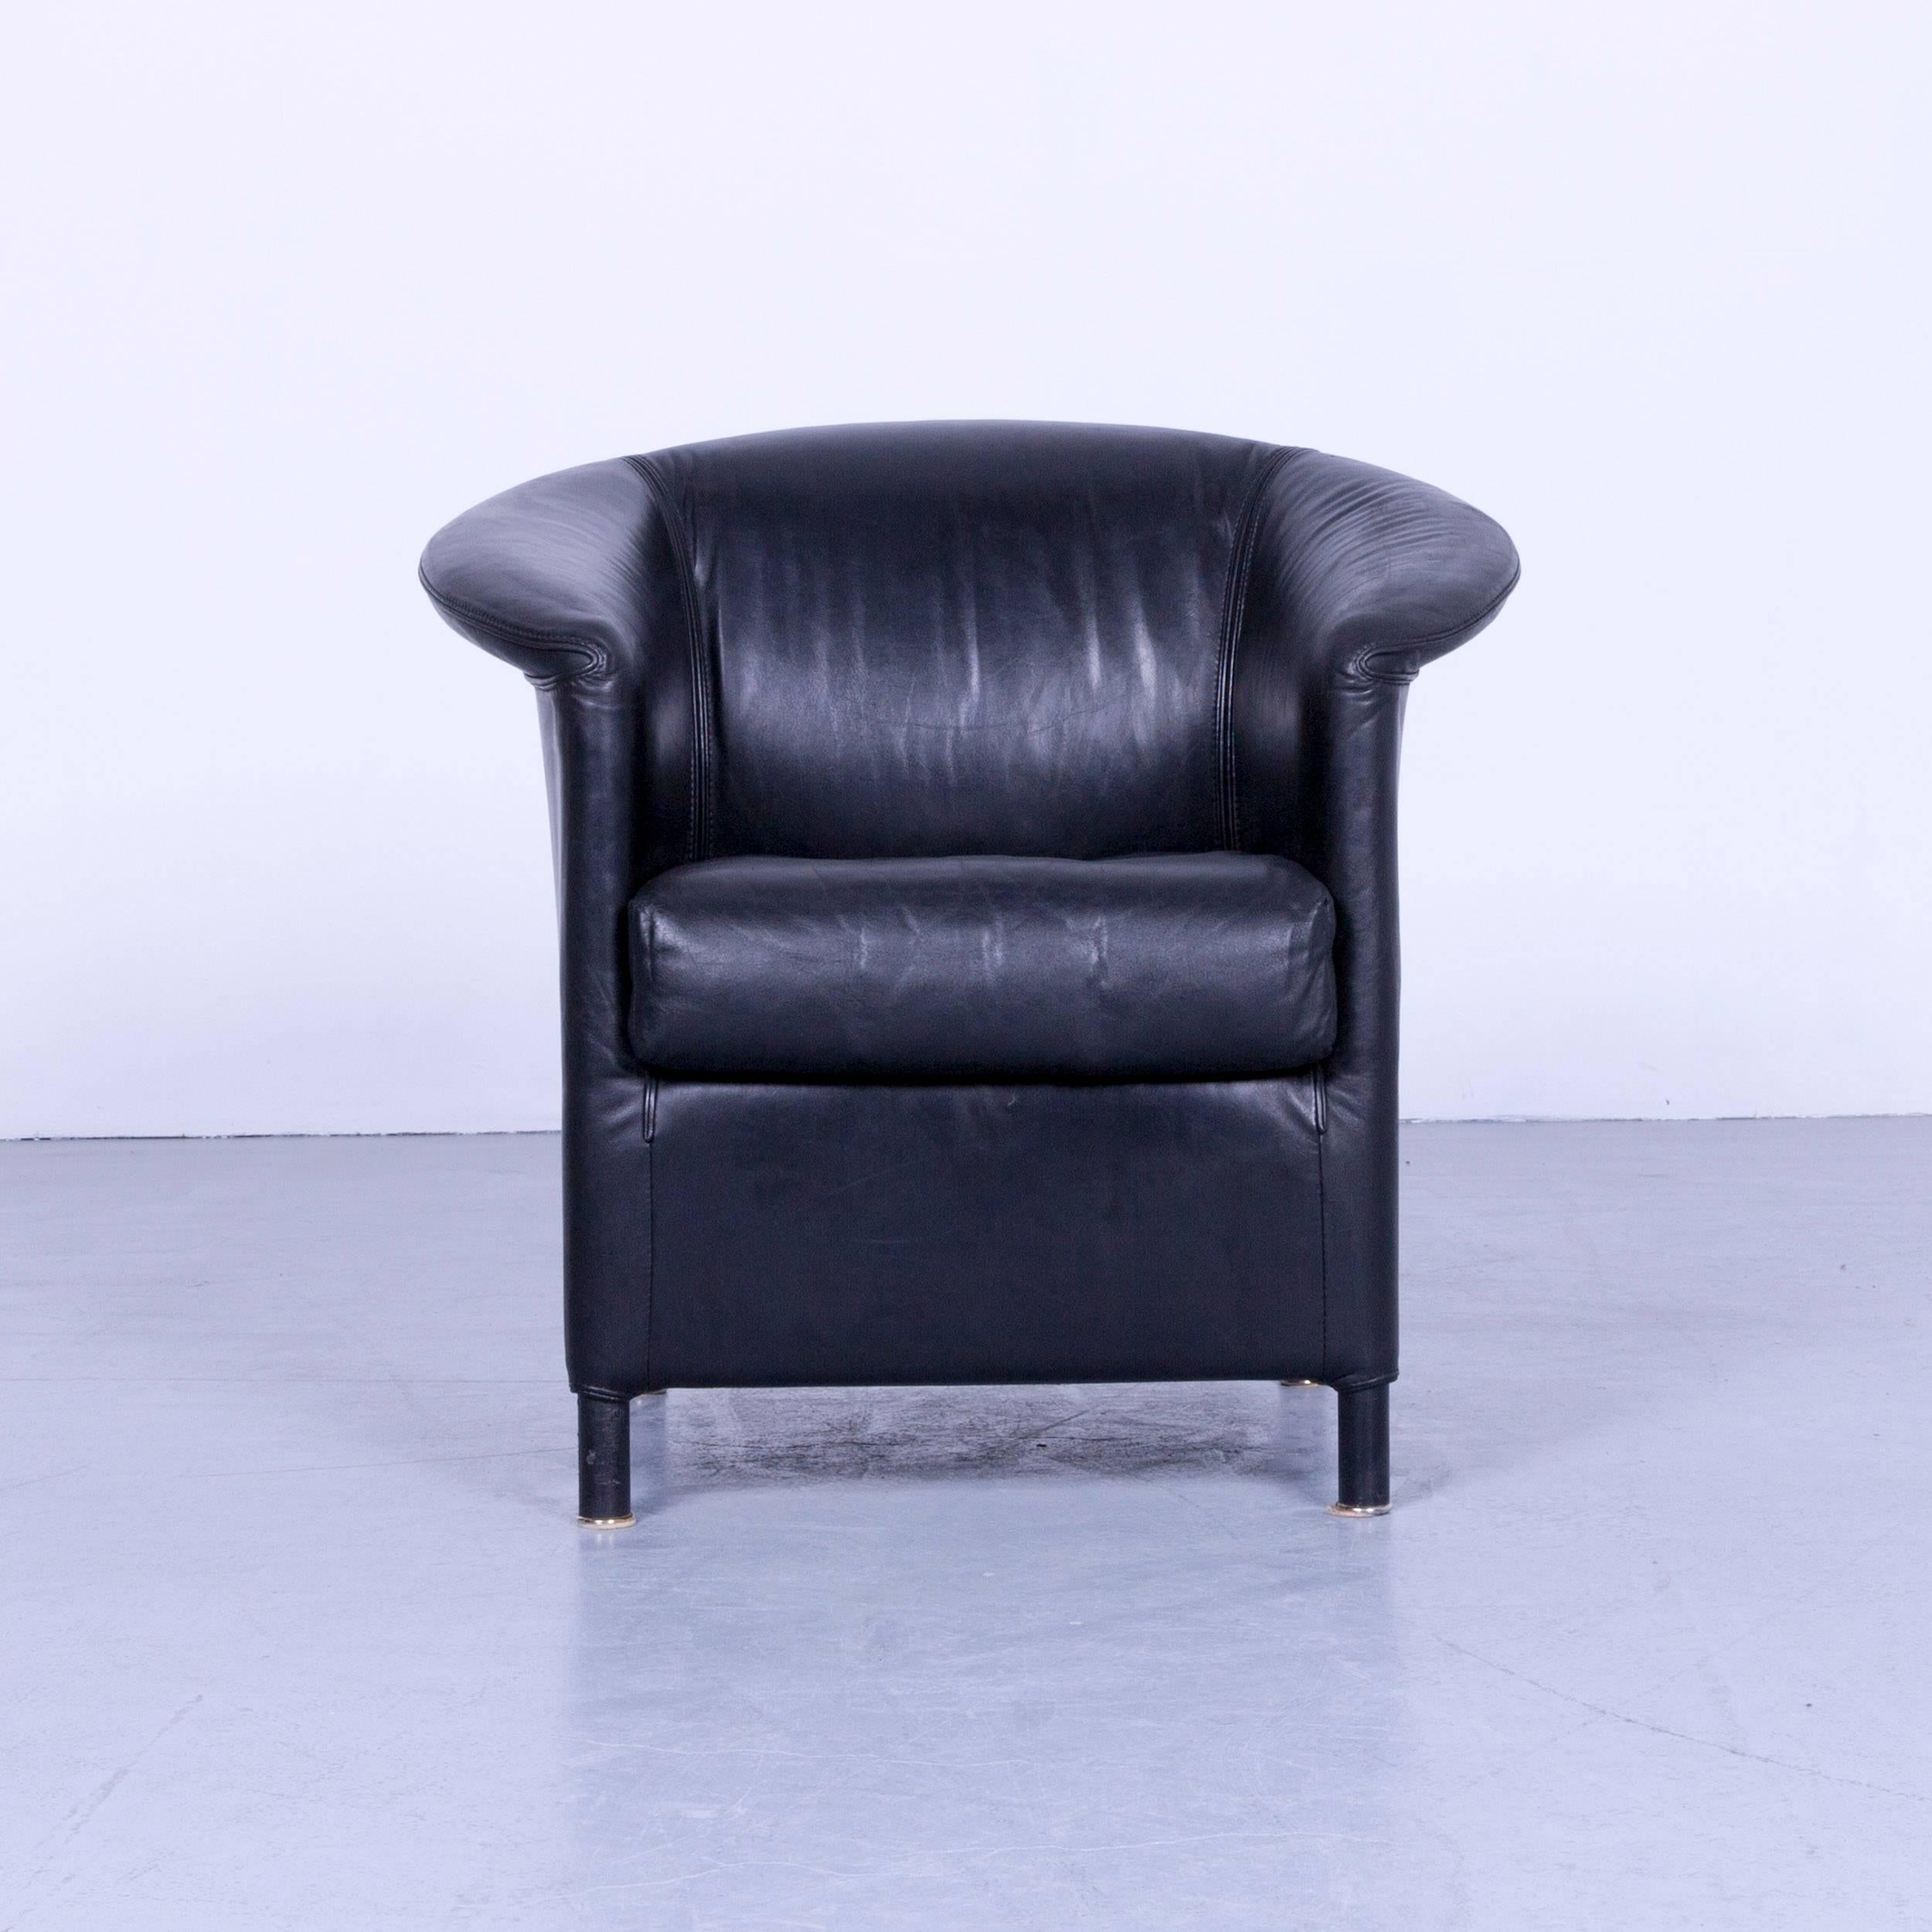 Black colored original Wittmann Aura designer leather armchair, in a minimalistic and modern design, made for pure comfort.